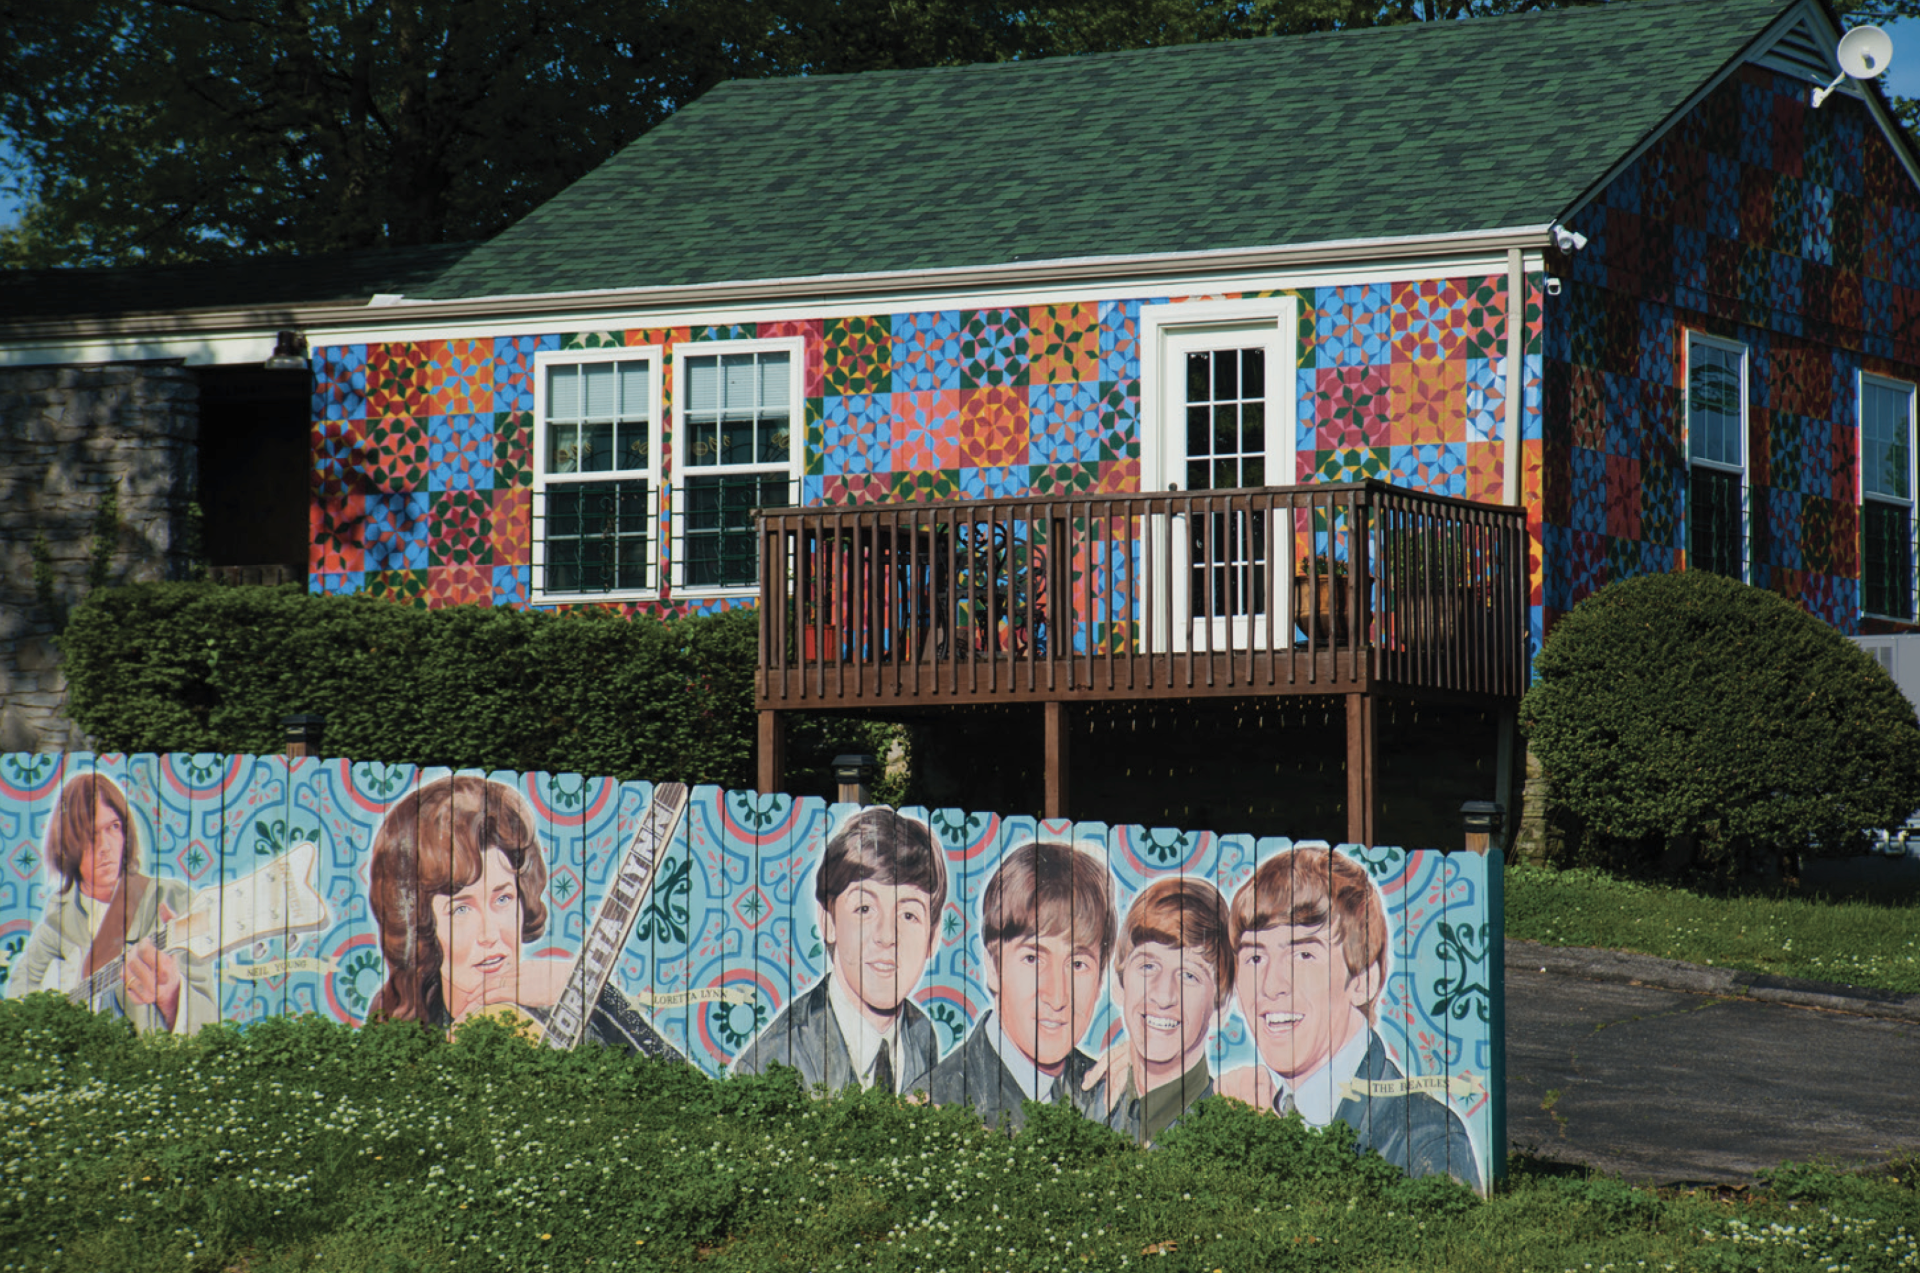 Music themed mural on a house in Berry Hill, Nashville Tennessee